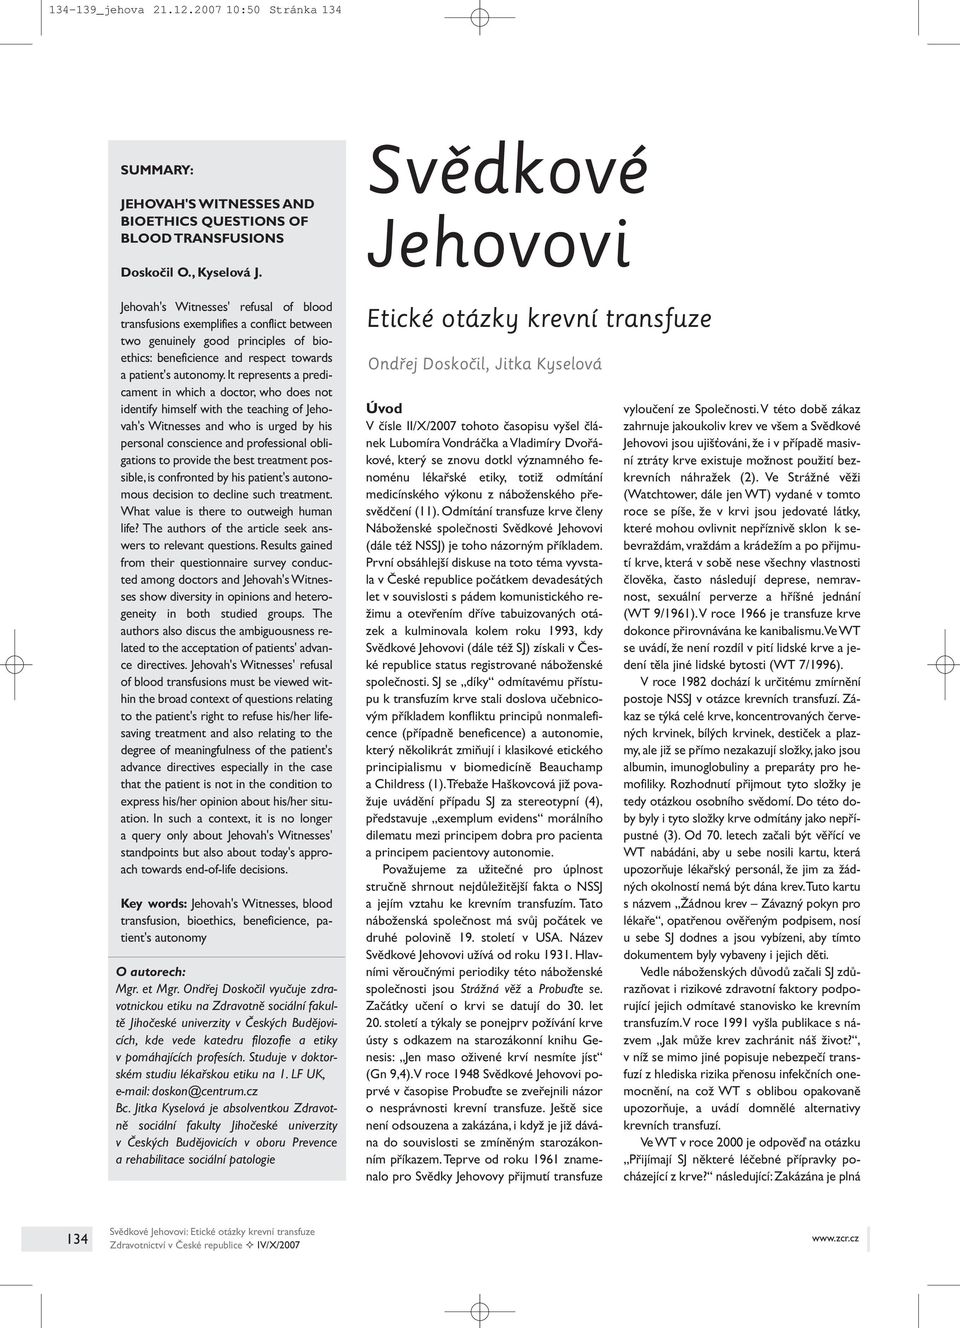 It represents a predicament in which a doctor, who does not identify himself with the teaching of Jehovah's Witnesses and who is urged by his personal conscience and professional obligations to